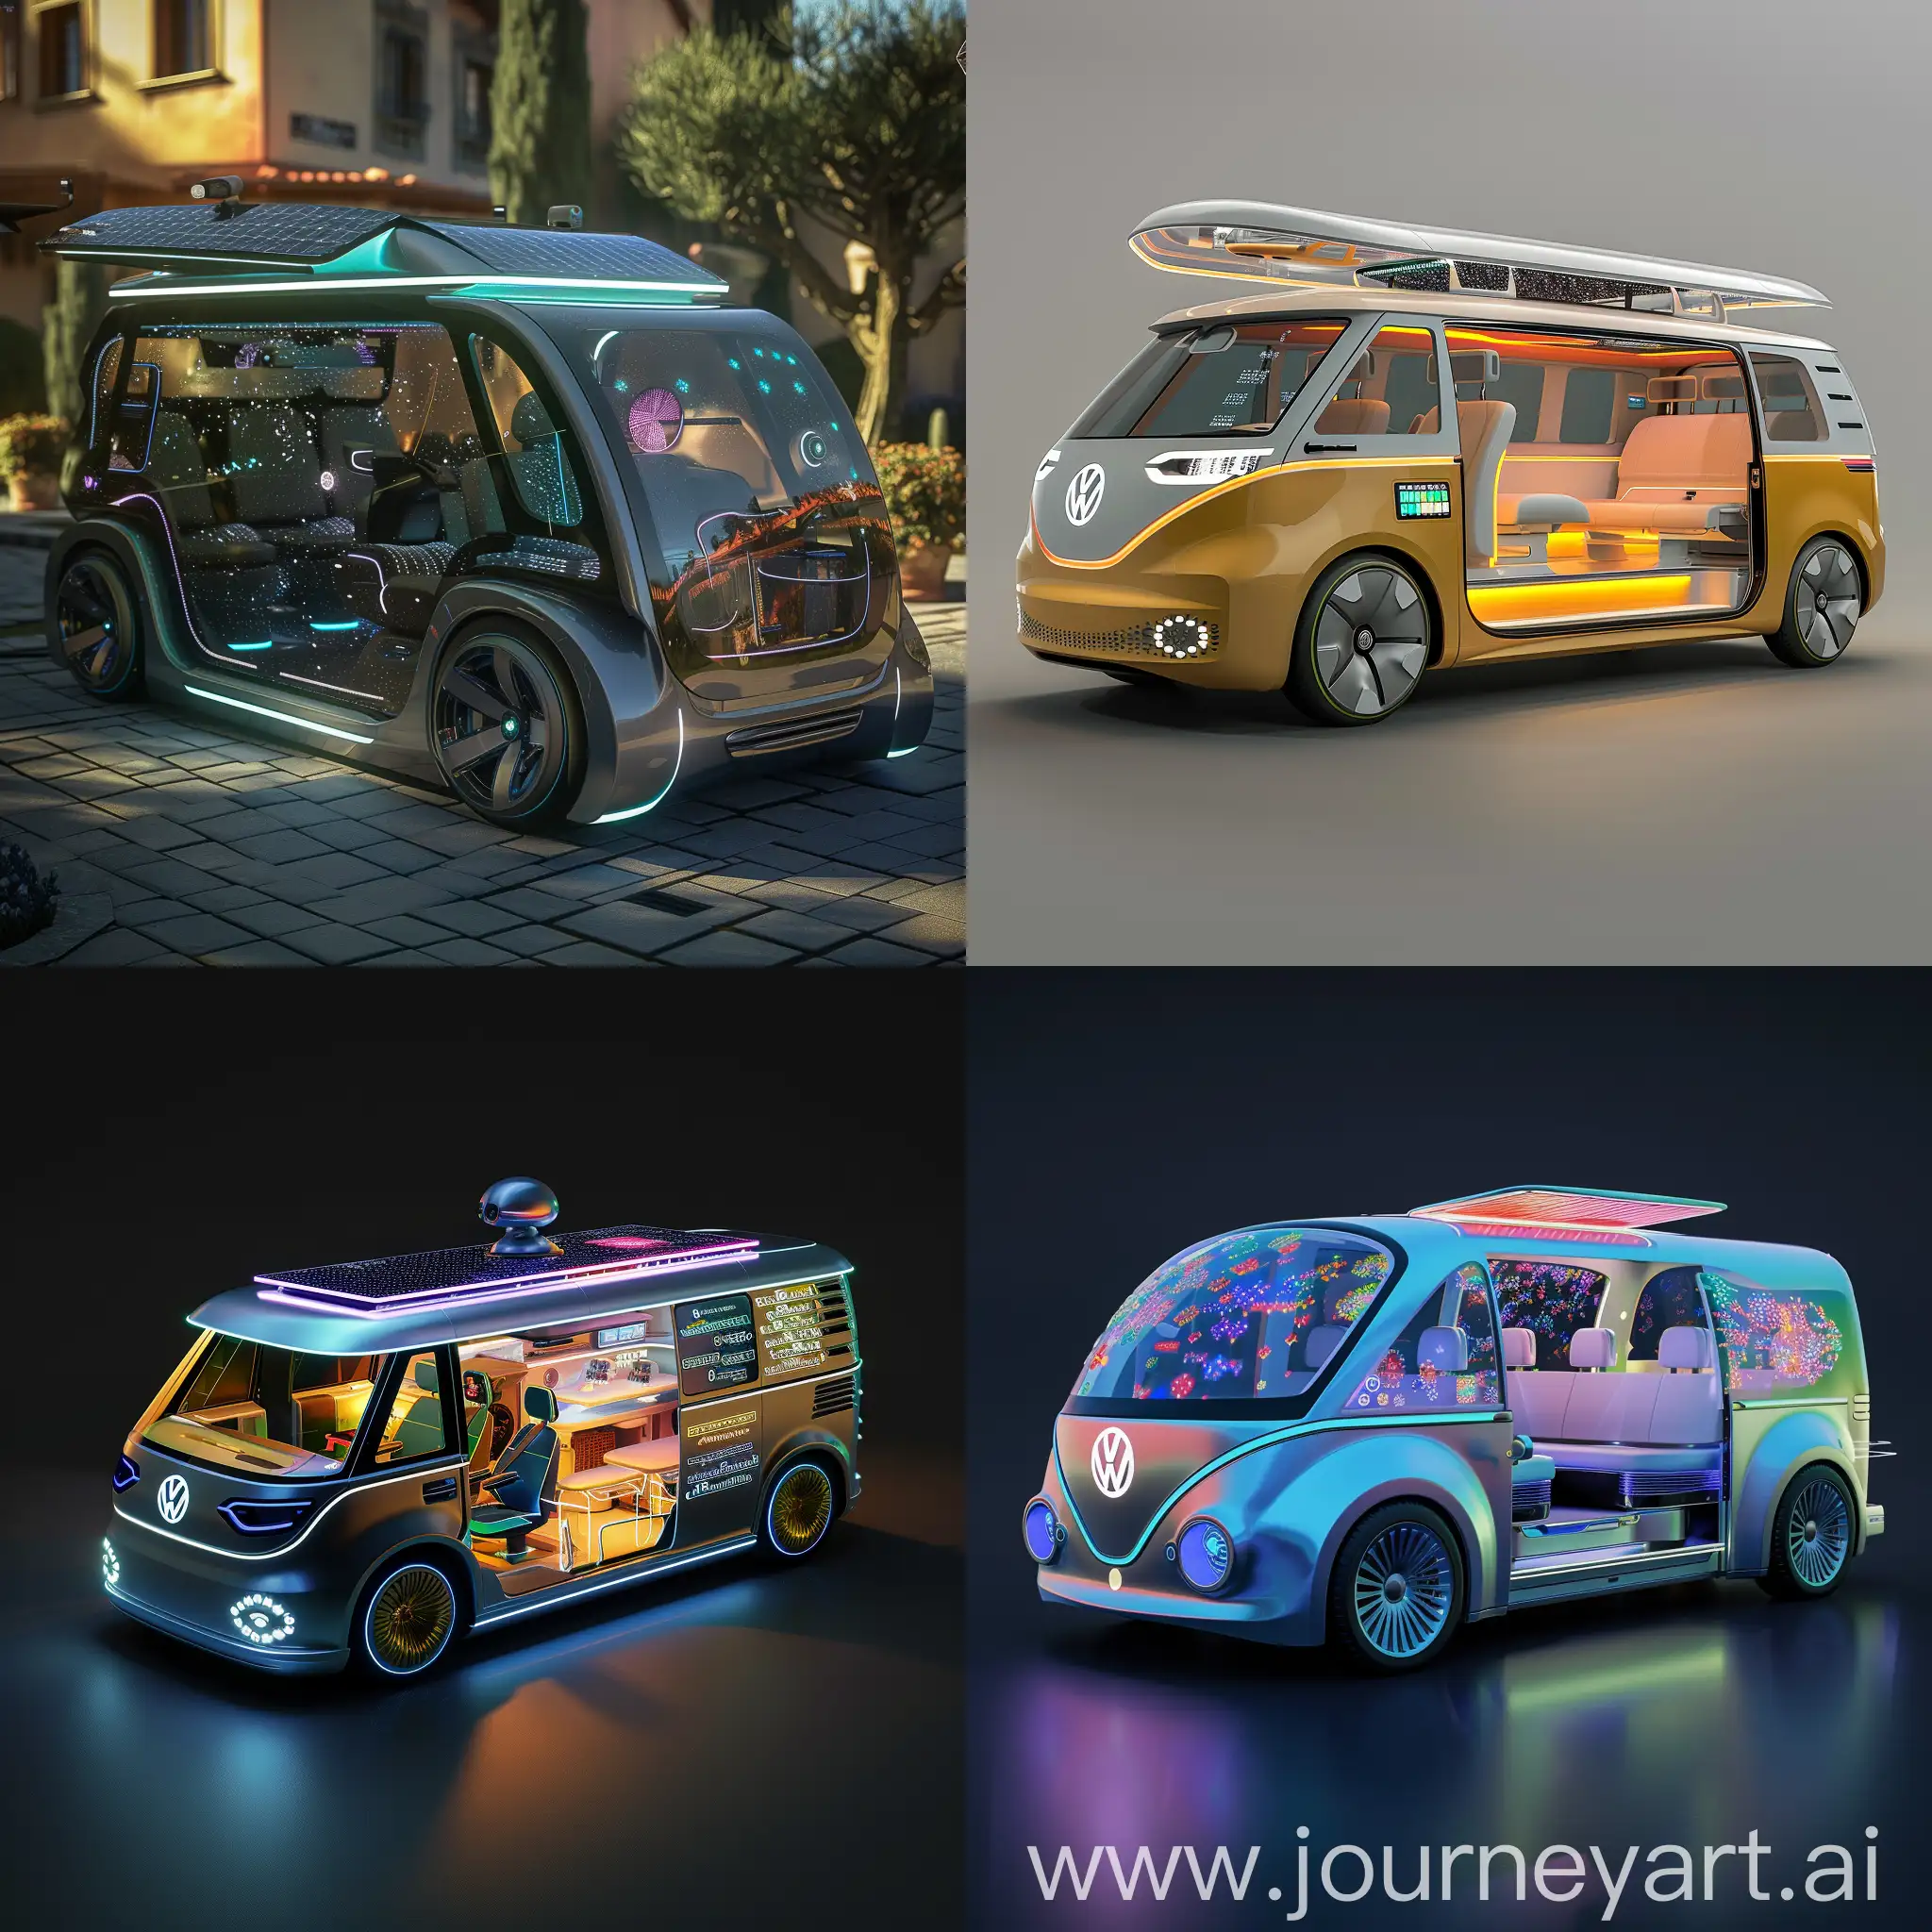 Futuristic microbus, in futuristic style, Autonomous Driving System, Augmented Reality Windshield, Biometric Authentication, Adaptive Interior Lighting, Smart Climate Control, Holographic Entertainment System, Wireless Charging Stations, Advanced Voice Assistant, Dynamic Seating Configuration, Integrated Health Monitoring, Integrated LED Lighting, Solar Panel Roof, 360-Degree Camera System, Active Aerodynamics, Vehicle-to-Everything (V2X) Communication, Self-Healing Body Panels, Active Grille Shutters, Dynamic Paint with Electroluminescent Pigments, Remote Vehicle Charging Induction Pad, Active Sound Management System, Carbon Fiber Reinforced Plastic (CFRP) Seating, Aluminum Interior Trim, Composite Flooring Materials, Thin-Film Transistor (TFT) Displays, Magnesium Alloy Structural Components, Polycarbonate Windows, Textile Composites for Upholstery, Foam Core Composite Panels, Thin Profile HVAC Components, Electronic Control Units (ECUs) Consolidation, Carbon Fiber Composite Body Panels, Aluminum Alloy Wheels, Integrated LED Lighting Systems, Advanced Lightweight Roof Rack, Carbon Fiber Side Mirrors, Composite Front Grille, Fiber-Reinforced Polymer Bumpers, Carbon Fiber Roof Spoiler, Thin-Film Solar Panels, Composite Aerodynamic Side Skirts, unreal engine 5 --stylize 1000